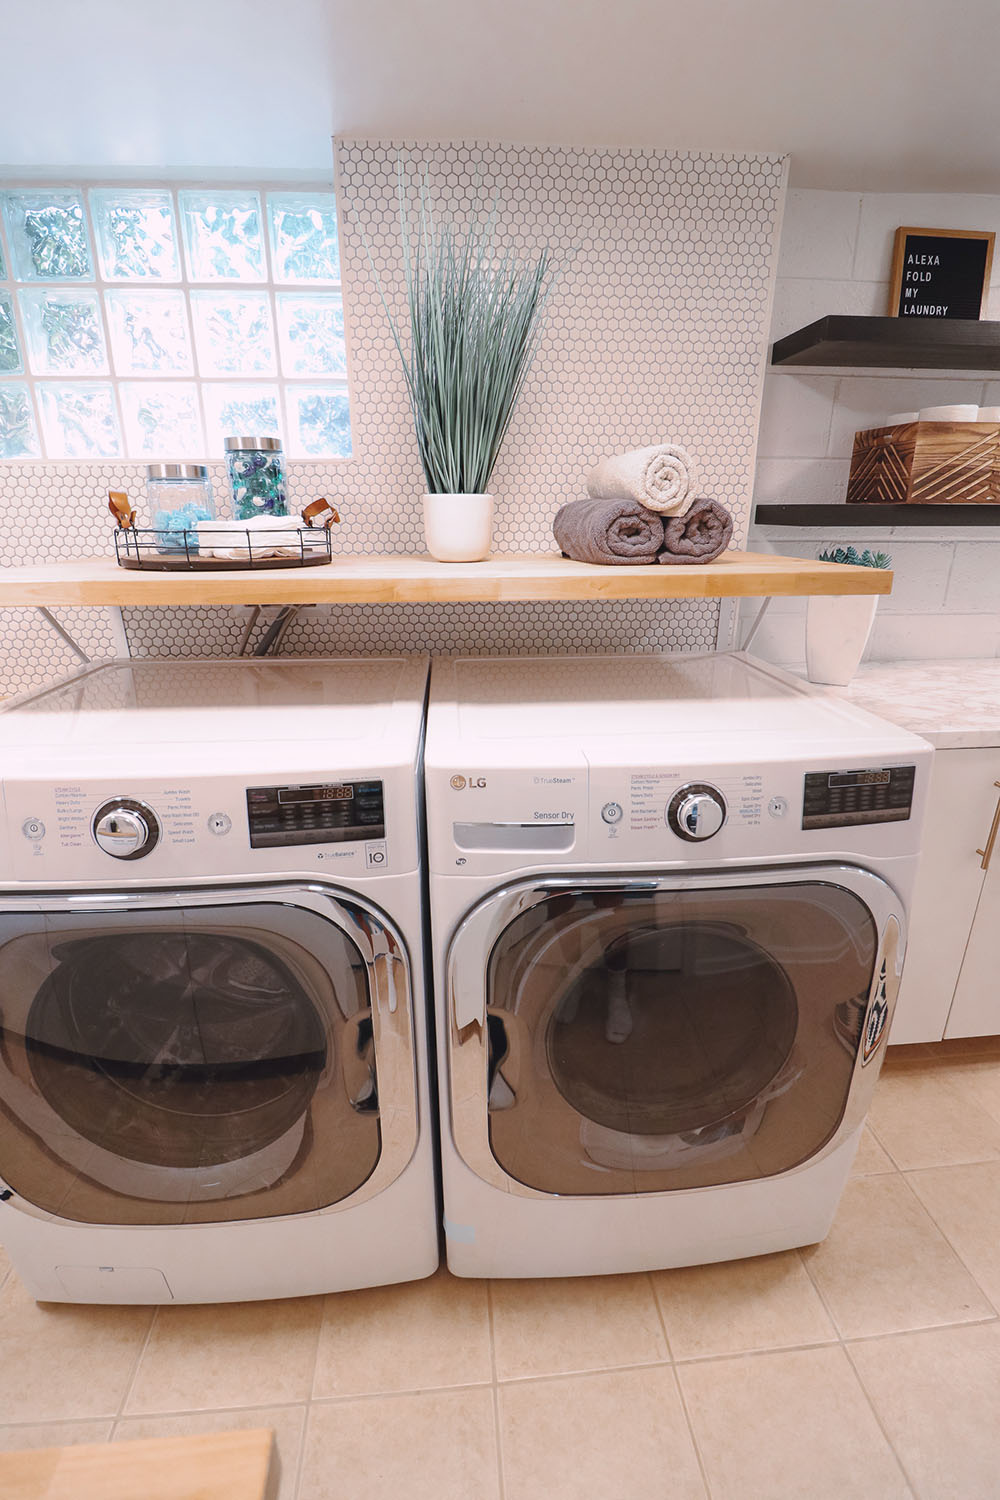 A white LG front load washer and dryer.